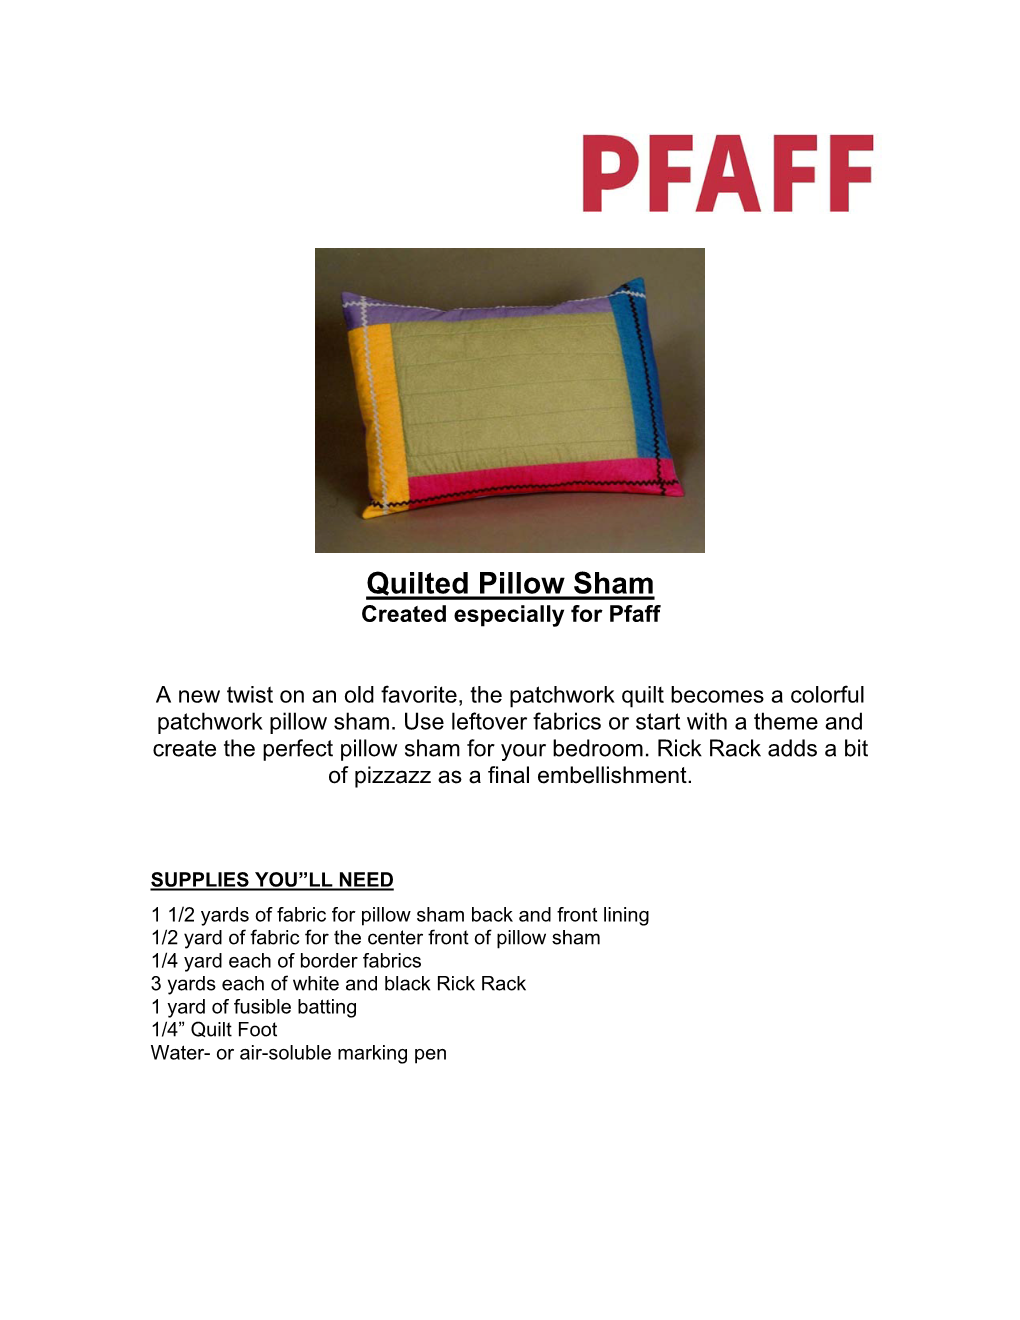 Quilted Pillow Sham Created Especially for Pfaff